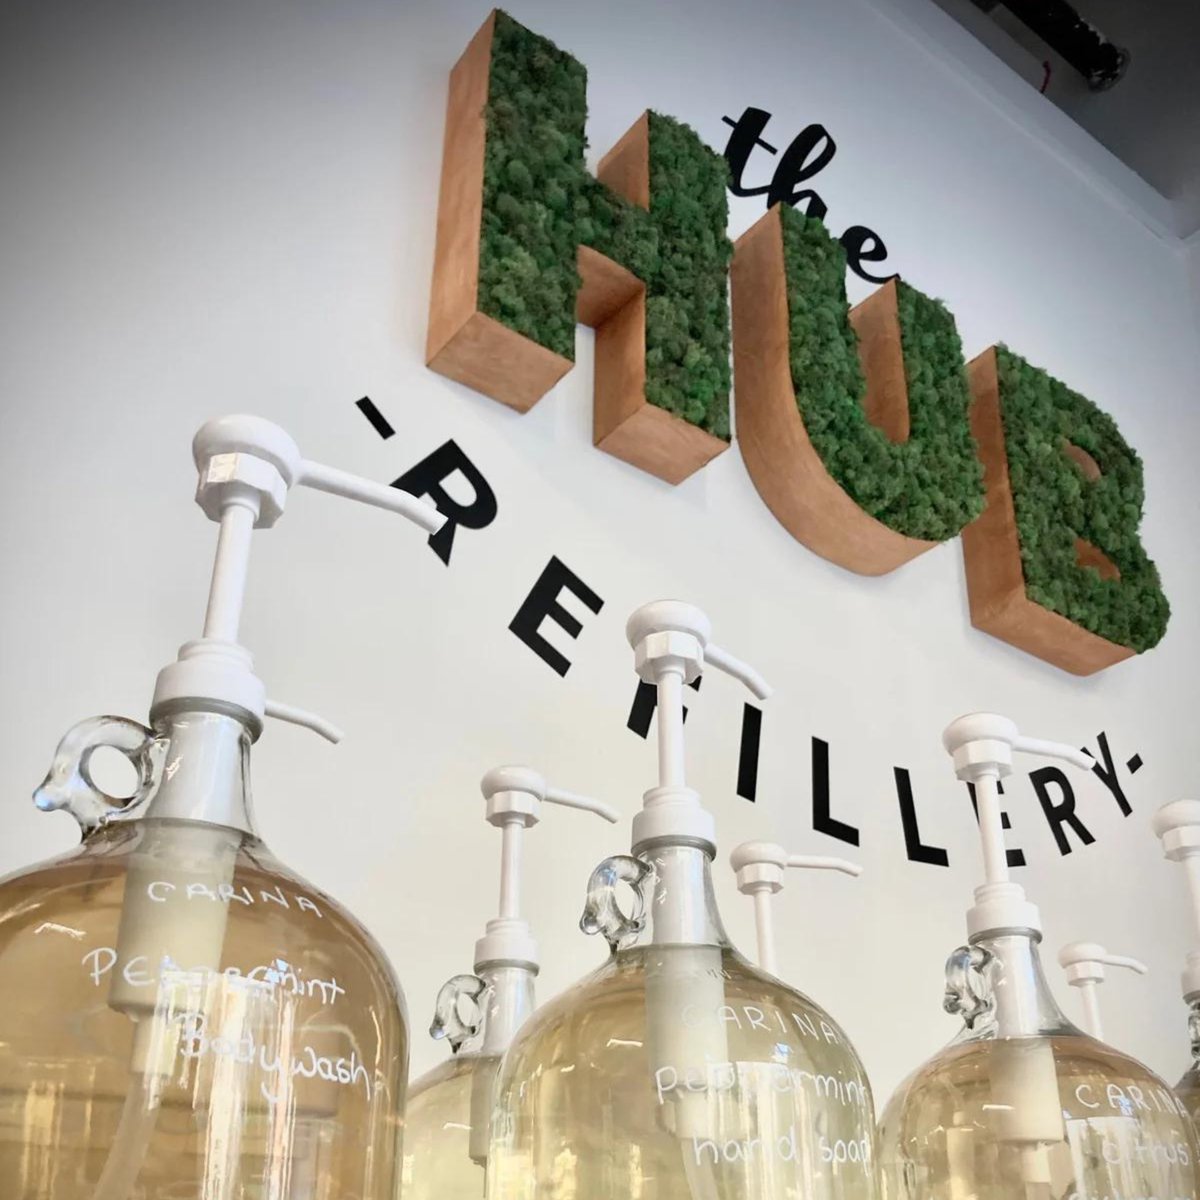 🔦 SPOTLIGHT SUNDAY 🔦

This week's Spotlight Sunday is The Hub Refillery. Their brand is all about quality, natural and local... just like us!

📍Delta, BC
-
-
-
-
#educatedbeards #spotlightsunday